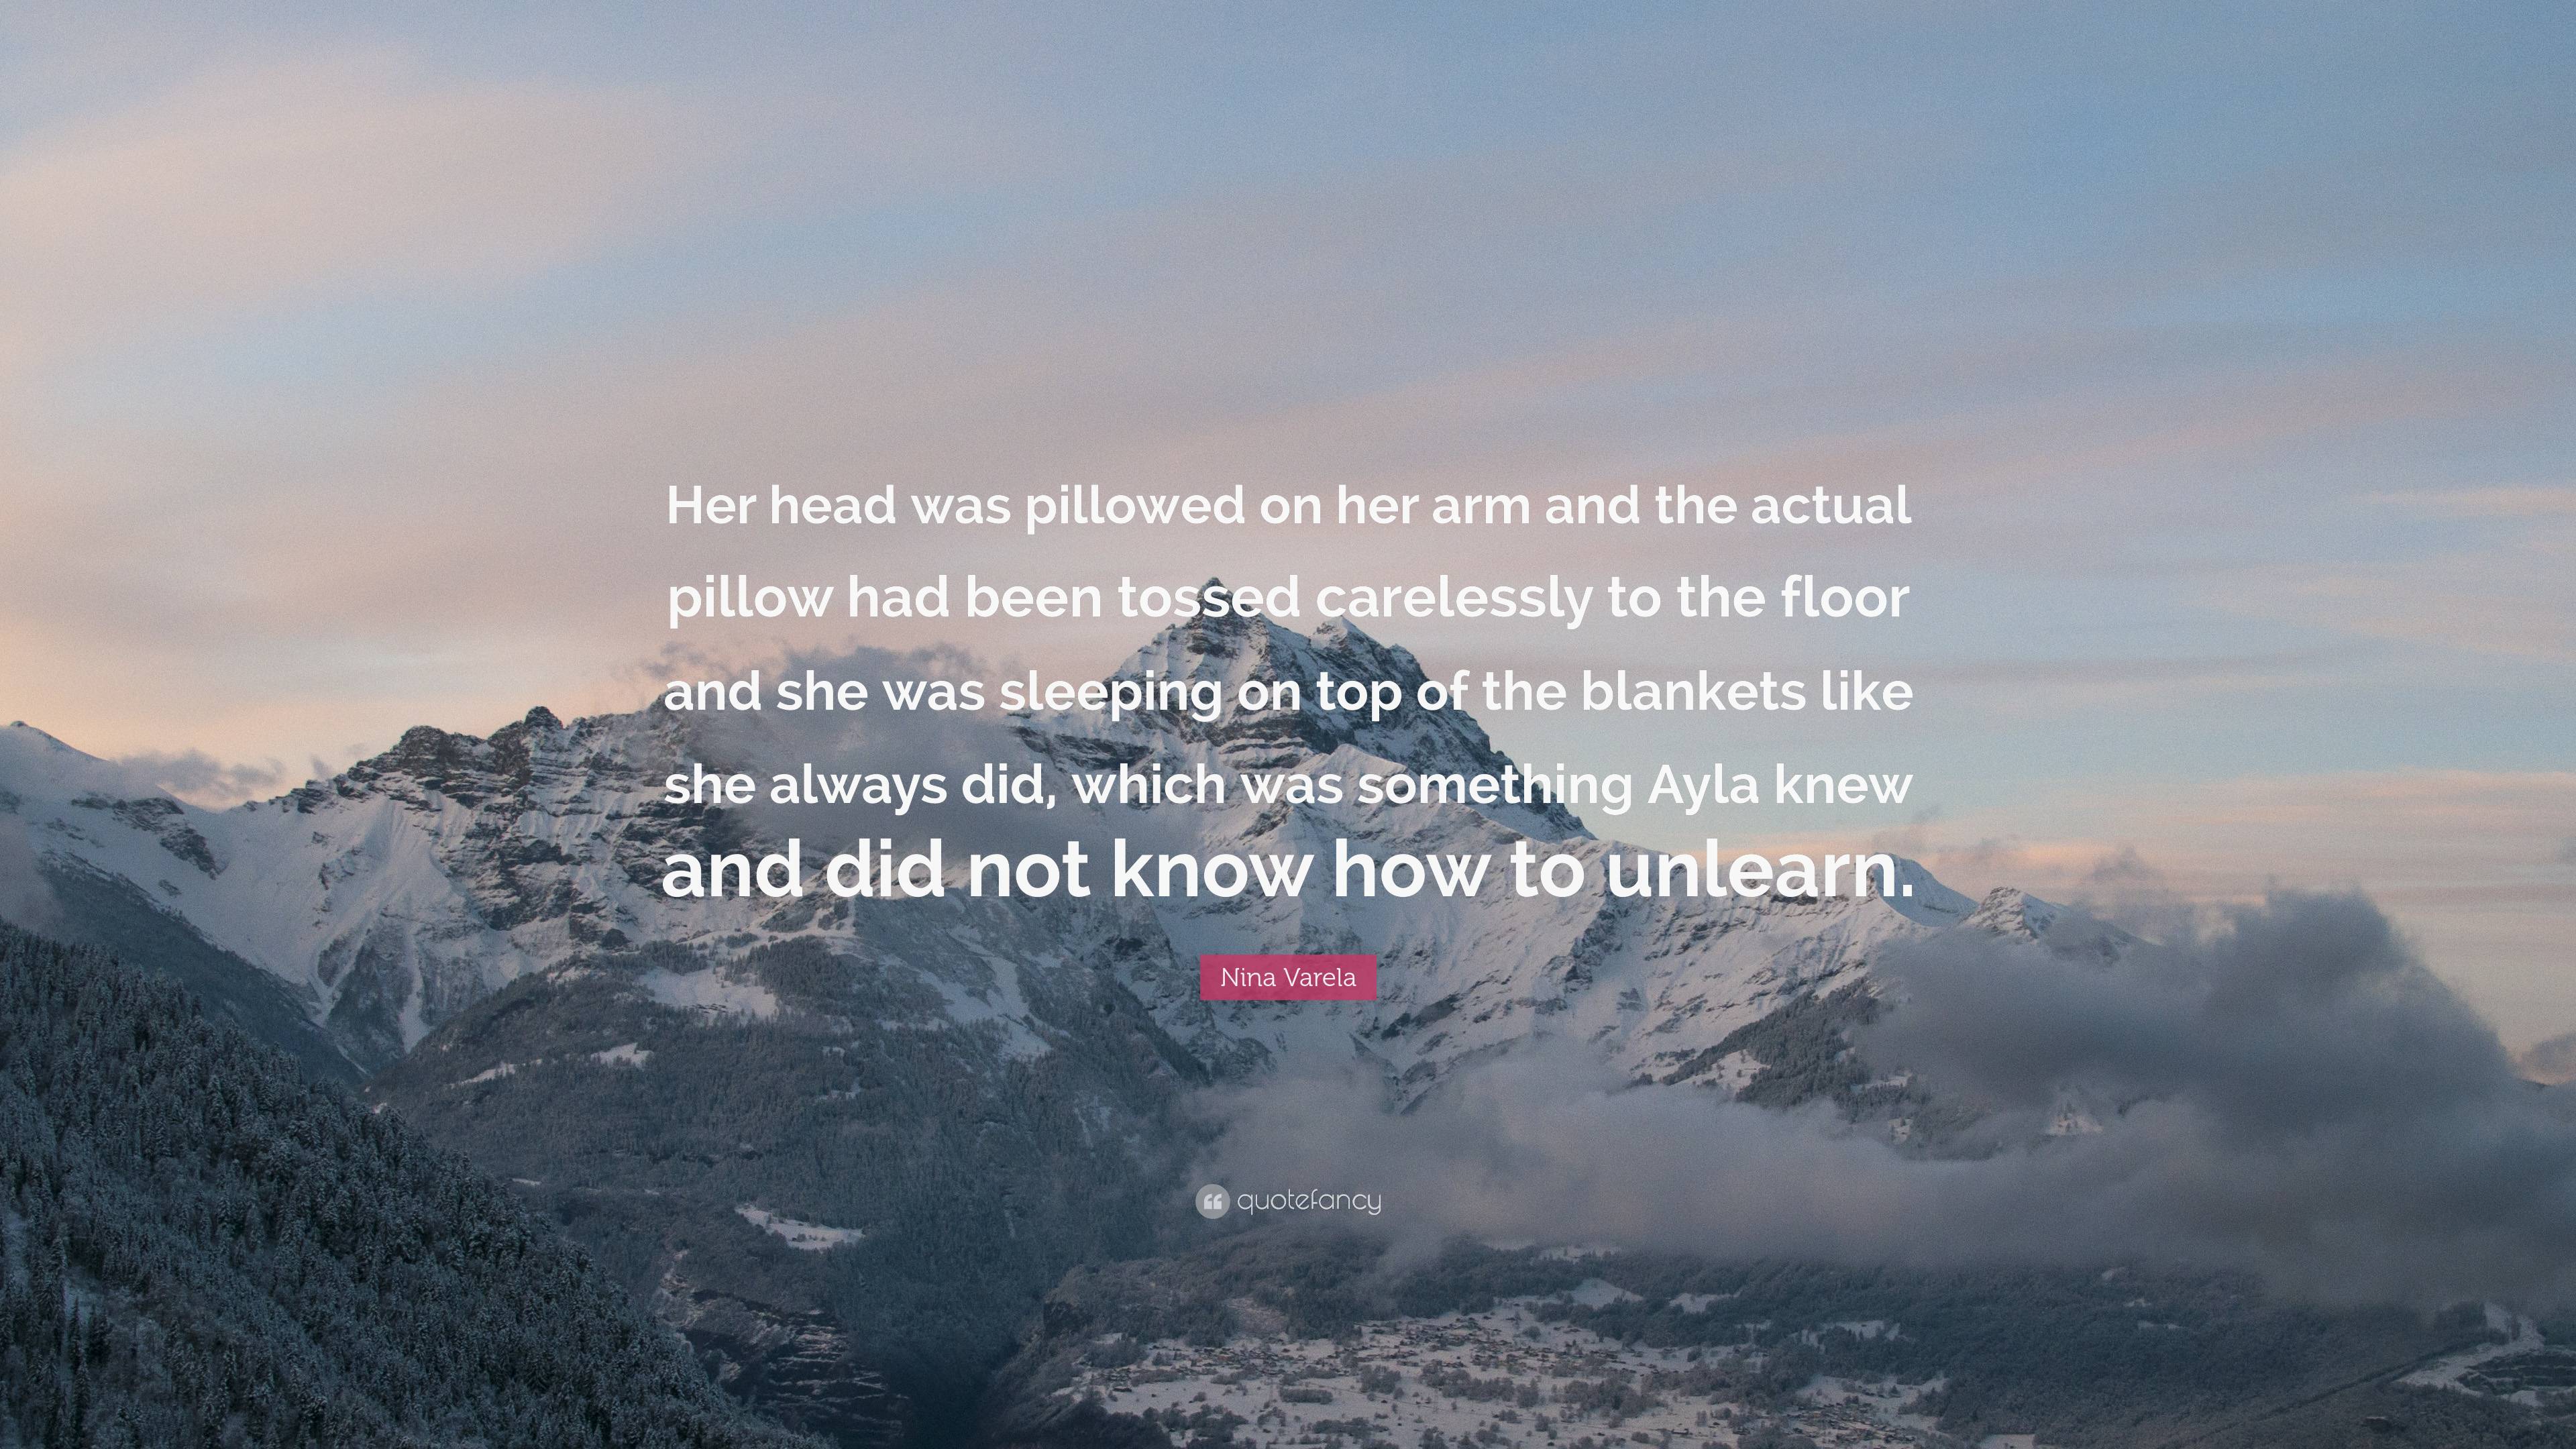 Nina Varela Quote: “Her head was pillowed on her arm and the actual ...